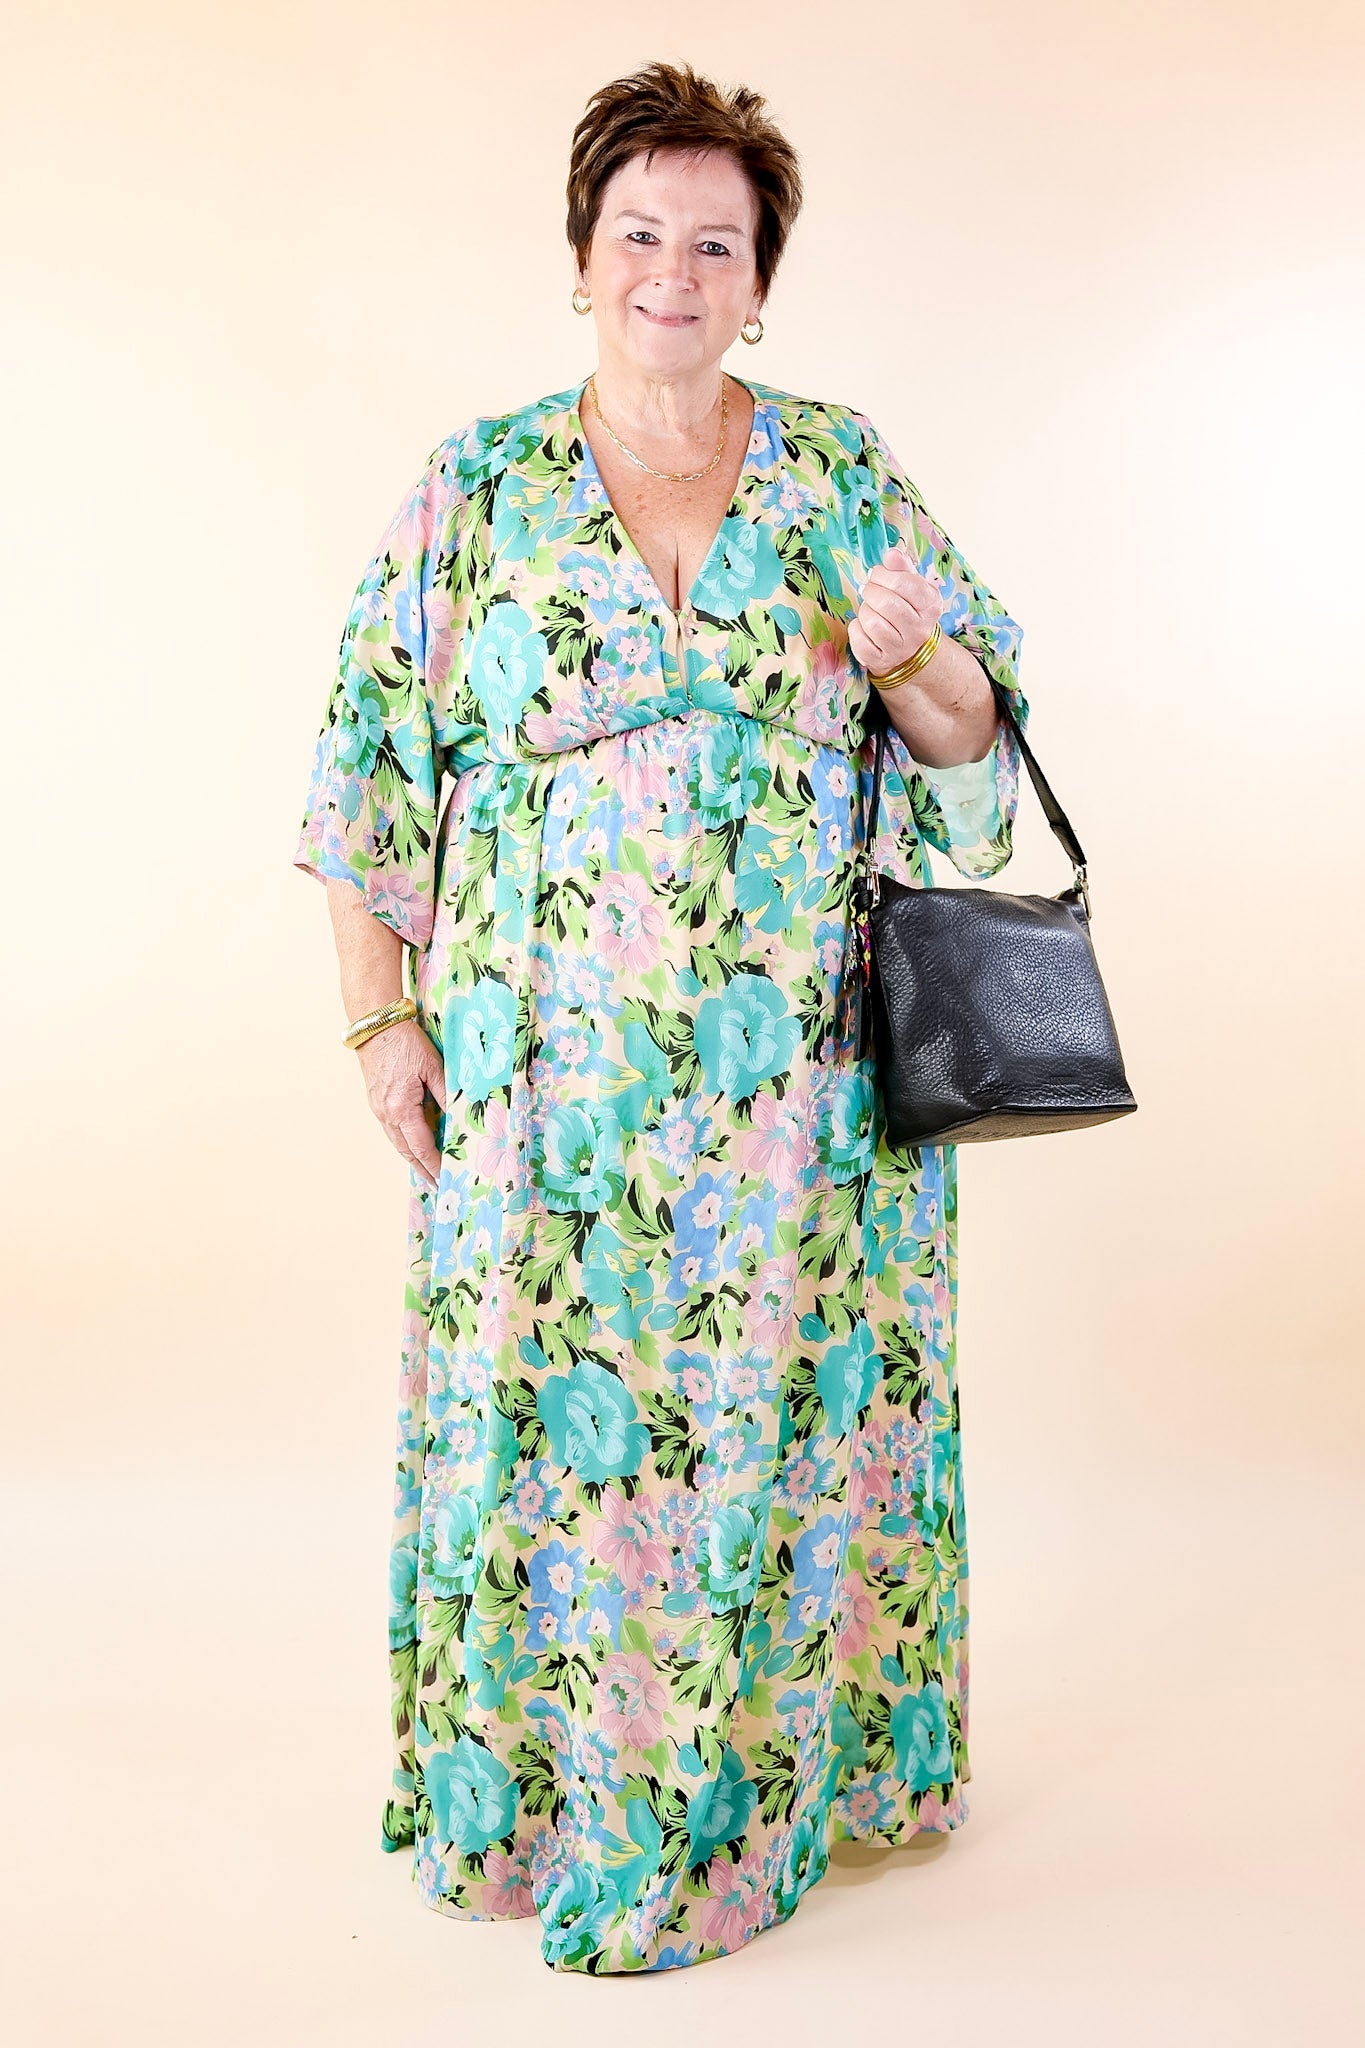 Beautifully Botanical V Neck Floral Print Maxi Dress in Blue and Green Mix - Giddy Up Glamour Boutique